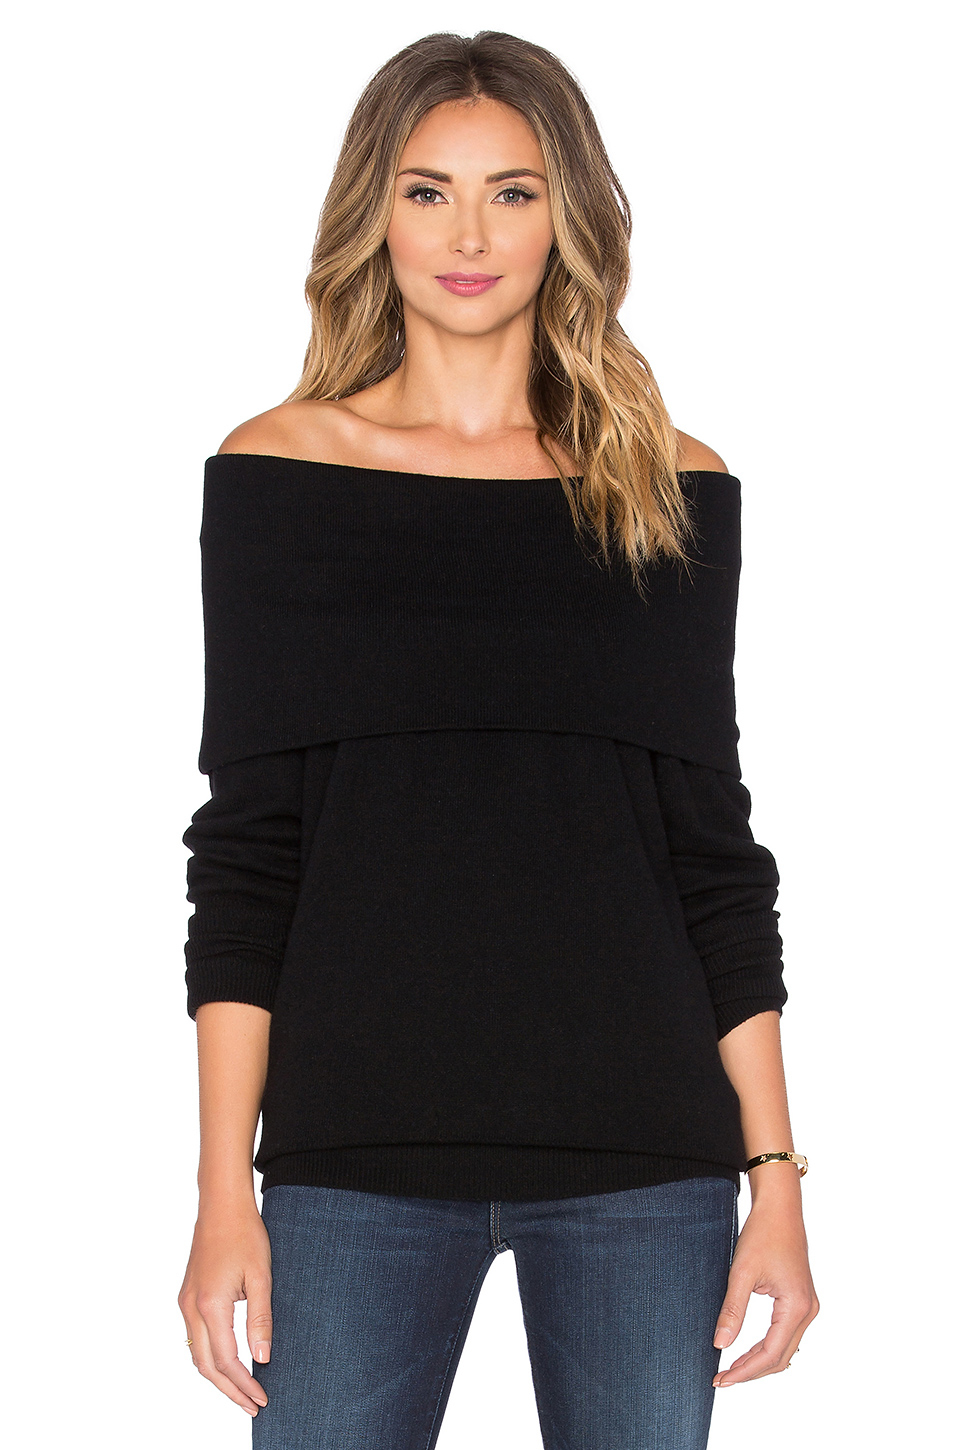 Autumn cashmere Slouchy Off Shoulder Sweater in Black | Lyst